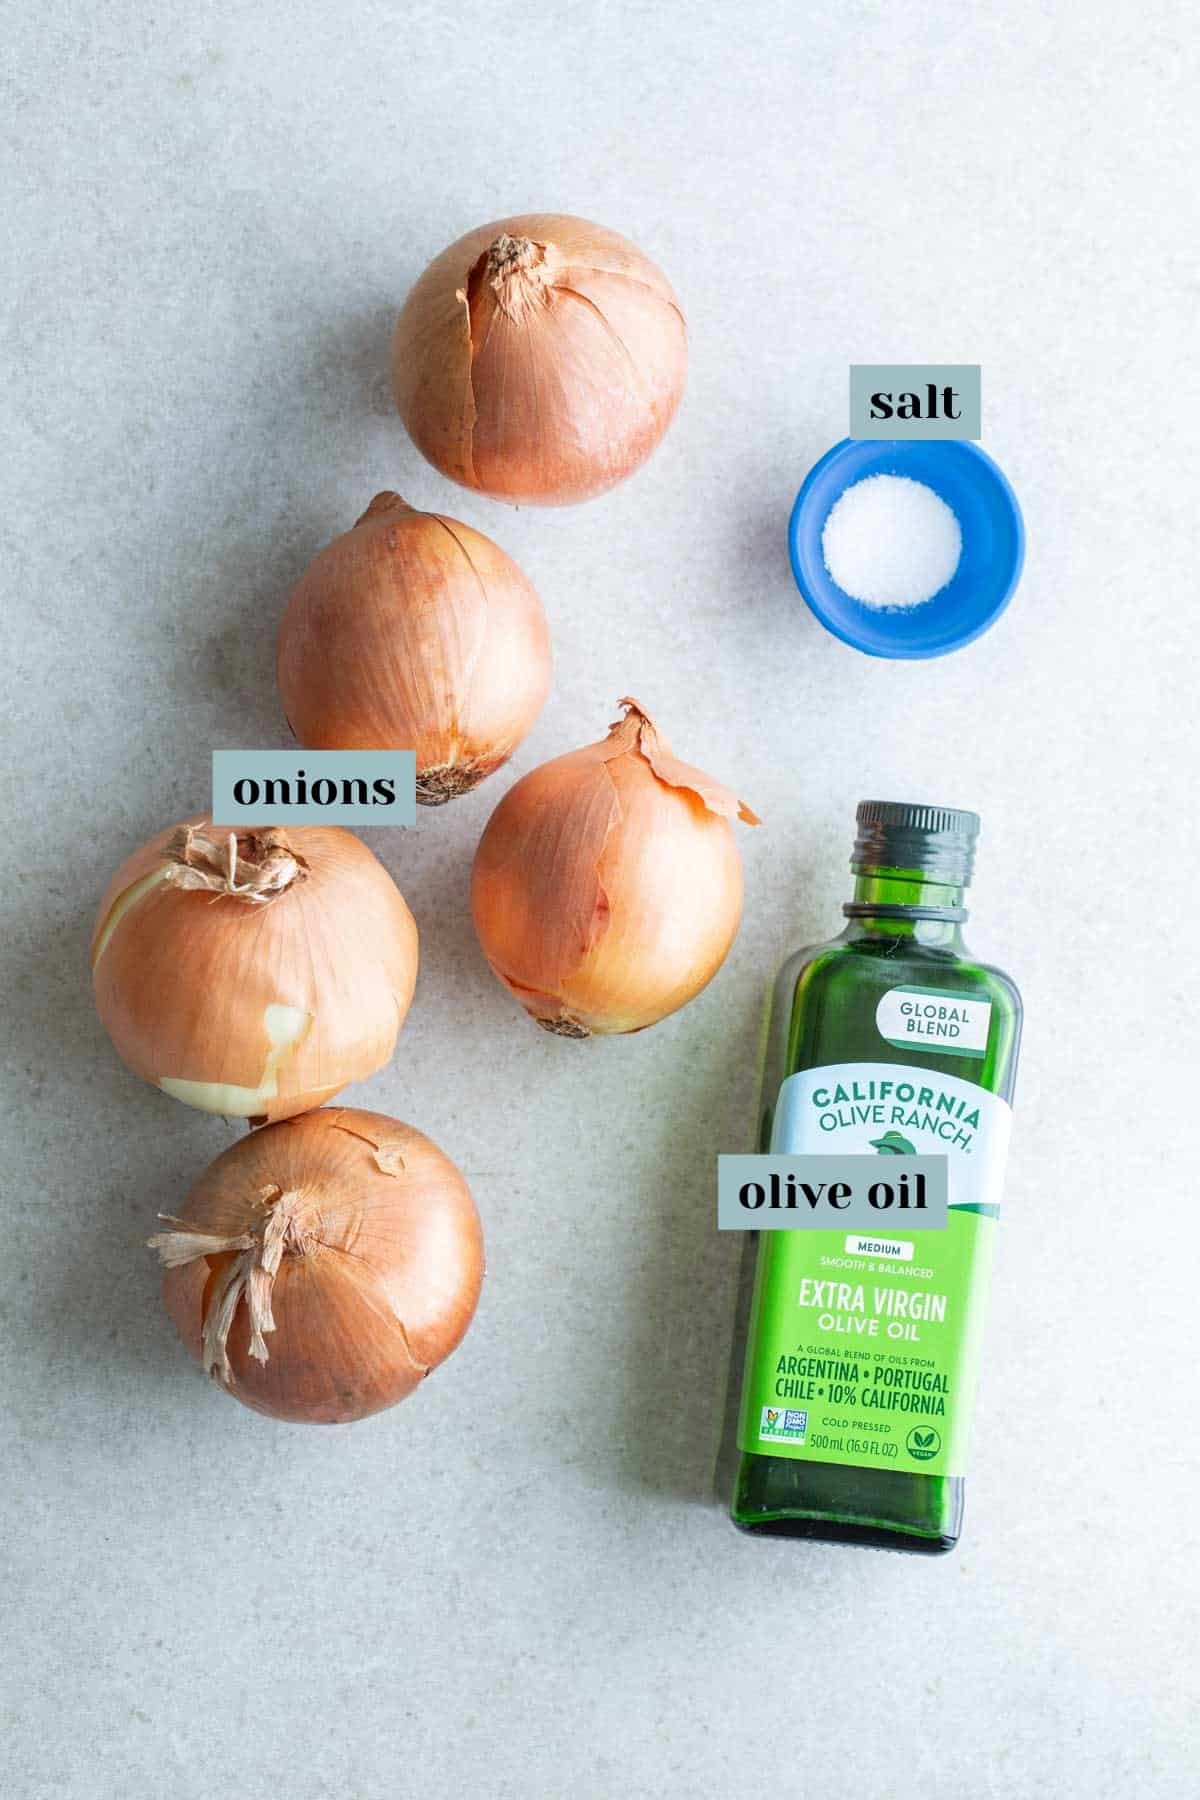 Ingredients for cooking: whole onions, olive oil, and salt on a kitchen countertop.